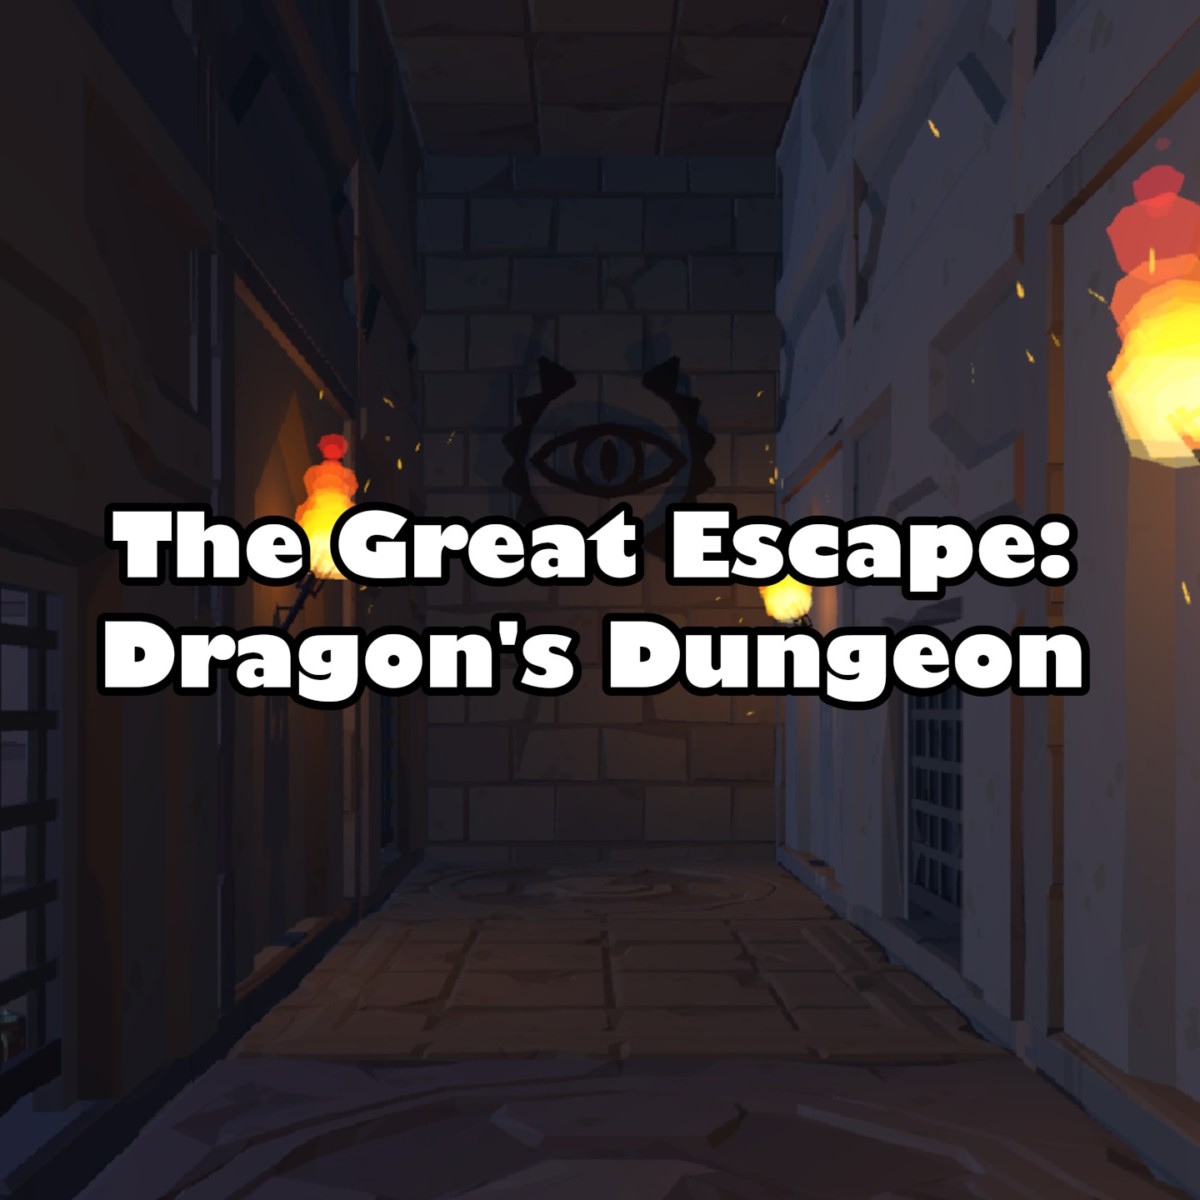 The Great Escape Dragon’s Dungeon